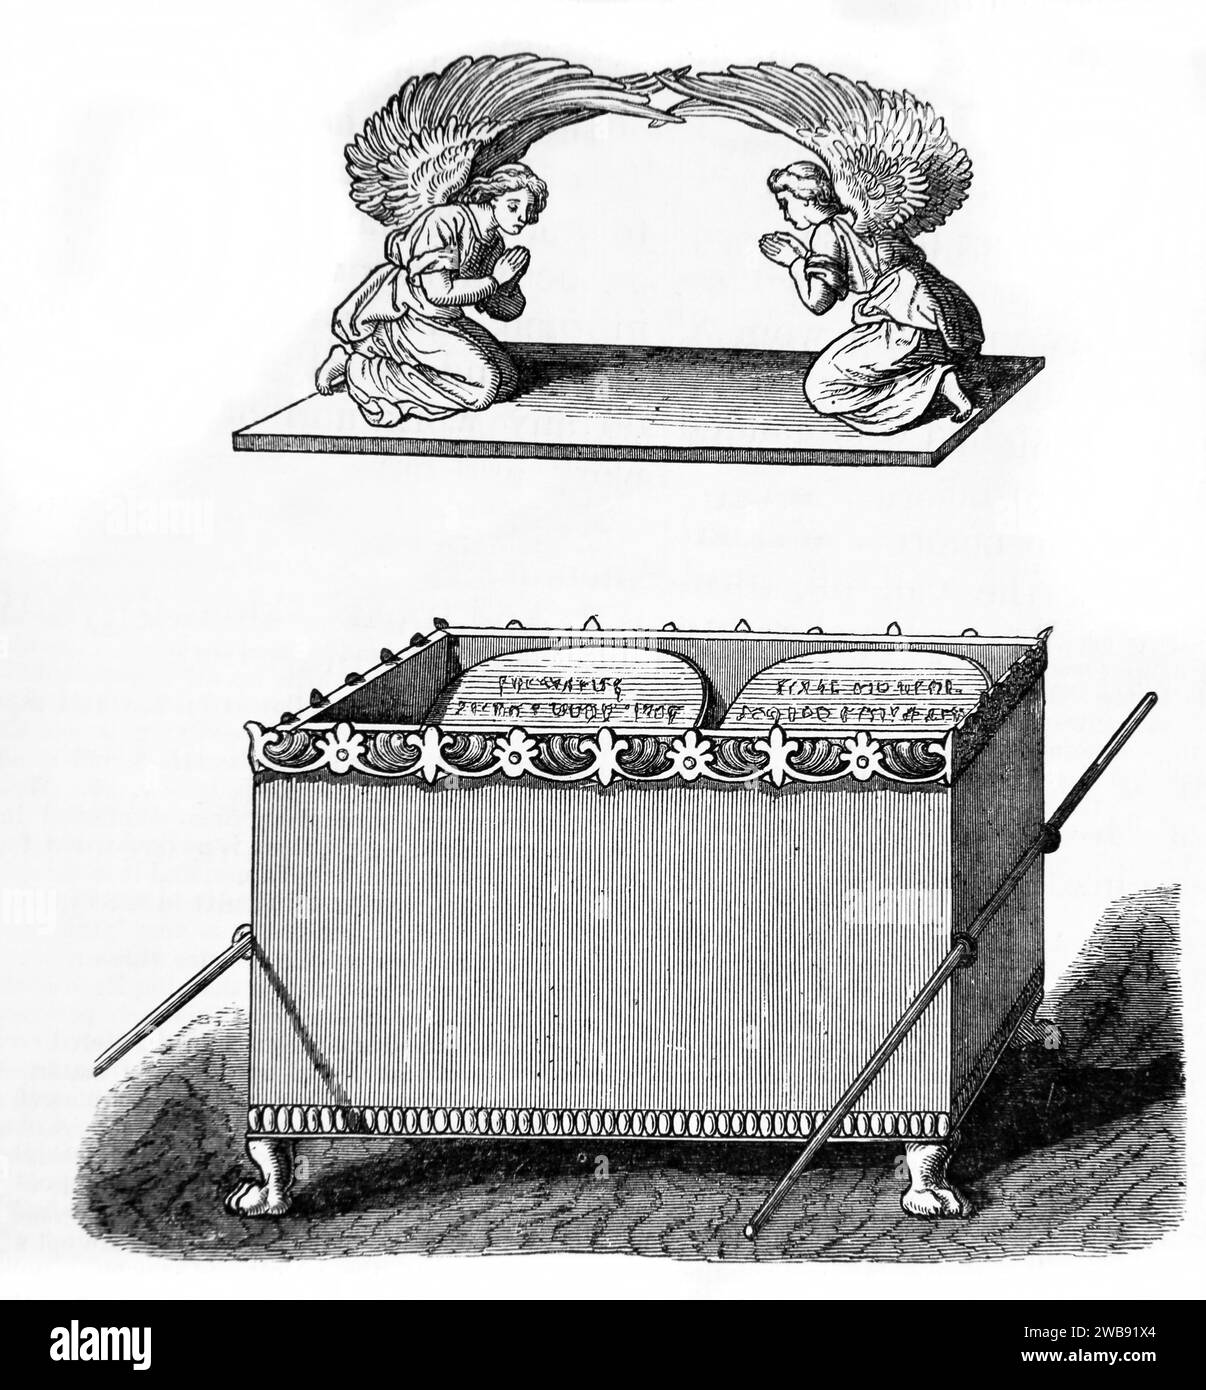 Wood Engraving of The Cherubim of Glory Shadowing the Mercy Set of The Ark of the Covenant Containing the Tablets of the Law from Illustrated Family B Stock Photo